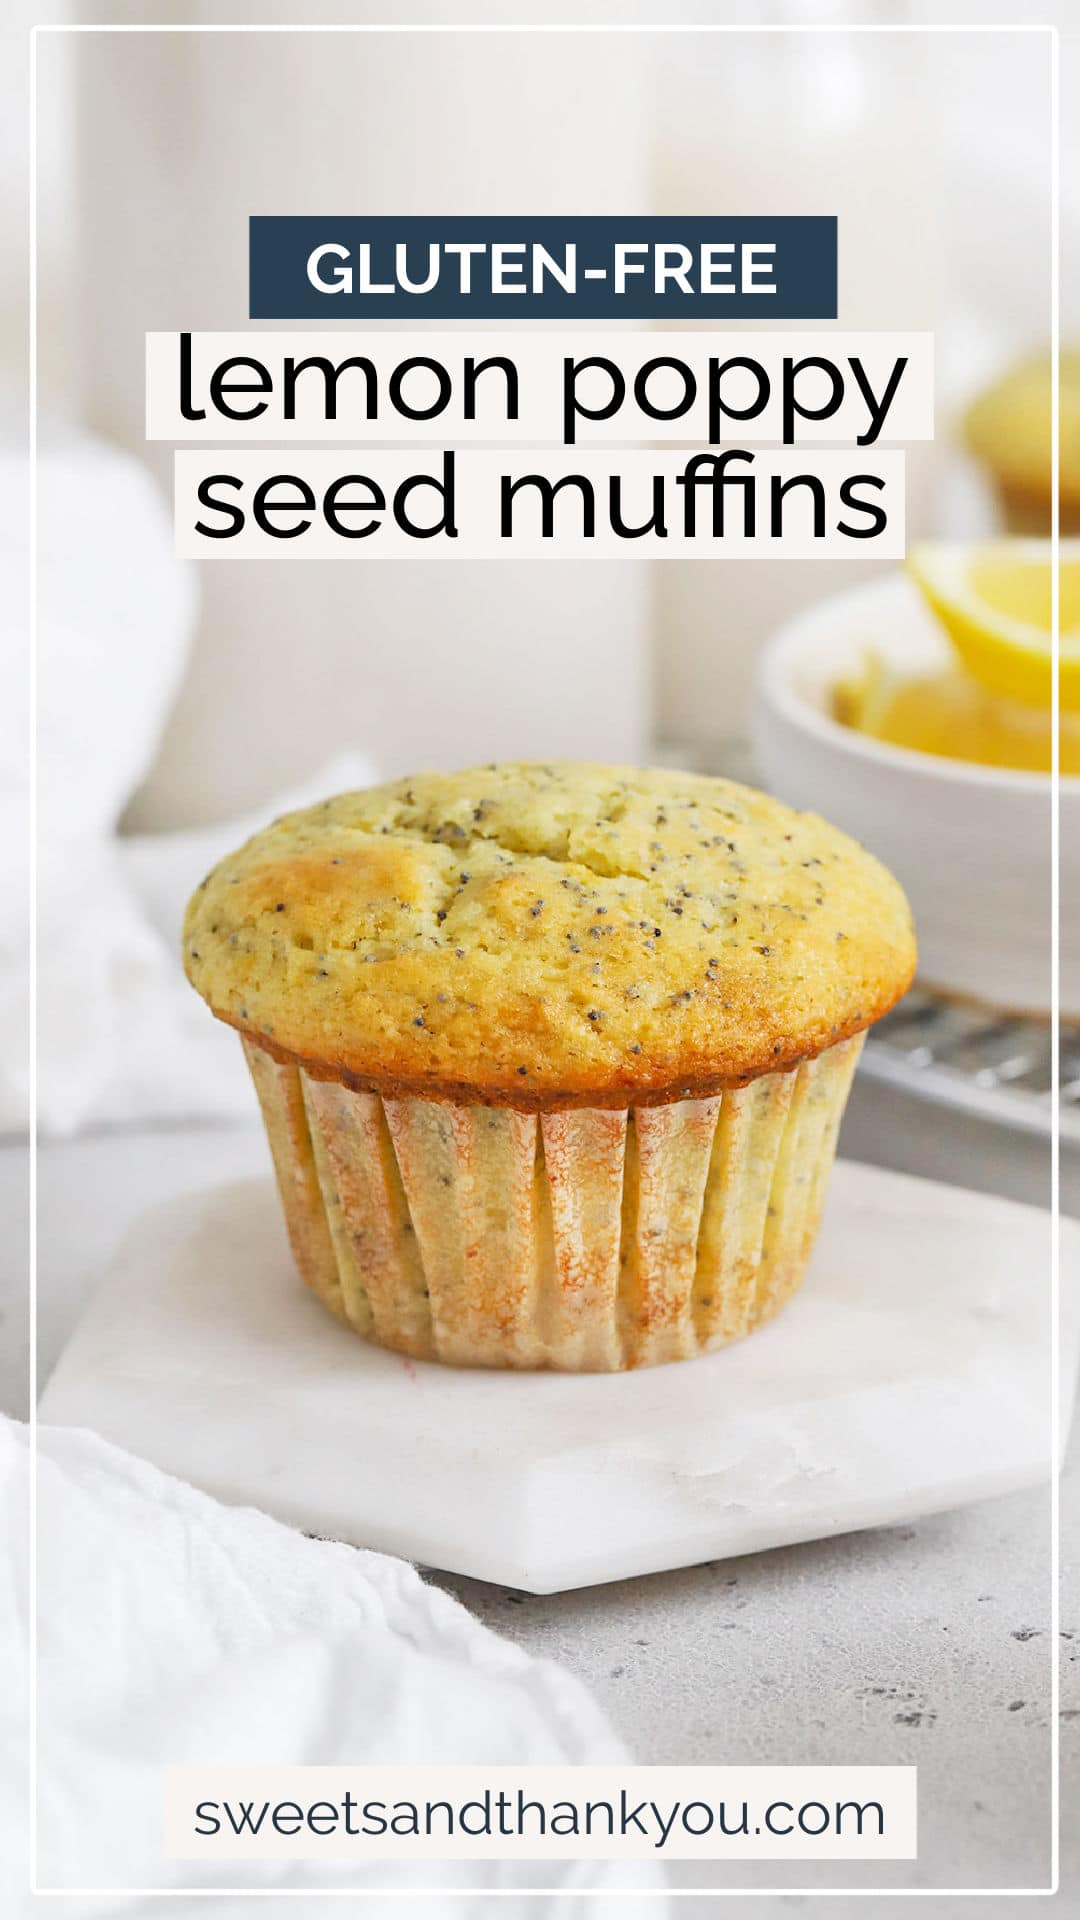 Gluten-Free Lemon Poppy Seed Muffins - These bright, sunny gluten-free lemon muffins are a total DREAM! Fluffy and citrusy with every bite. (Dairy-Free) // gluten free poppyseed muffins // gluten-free lemon poppyseed muffins // lemon poppy seed muffins recipe // lemon muffins recipe // gluten-free brunch // gluten-free muffins // gluten-free poppy seed muffins with glaze